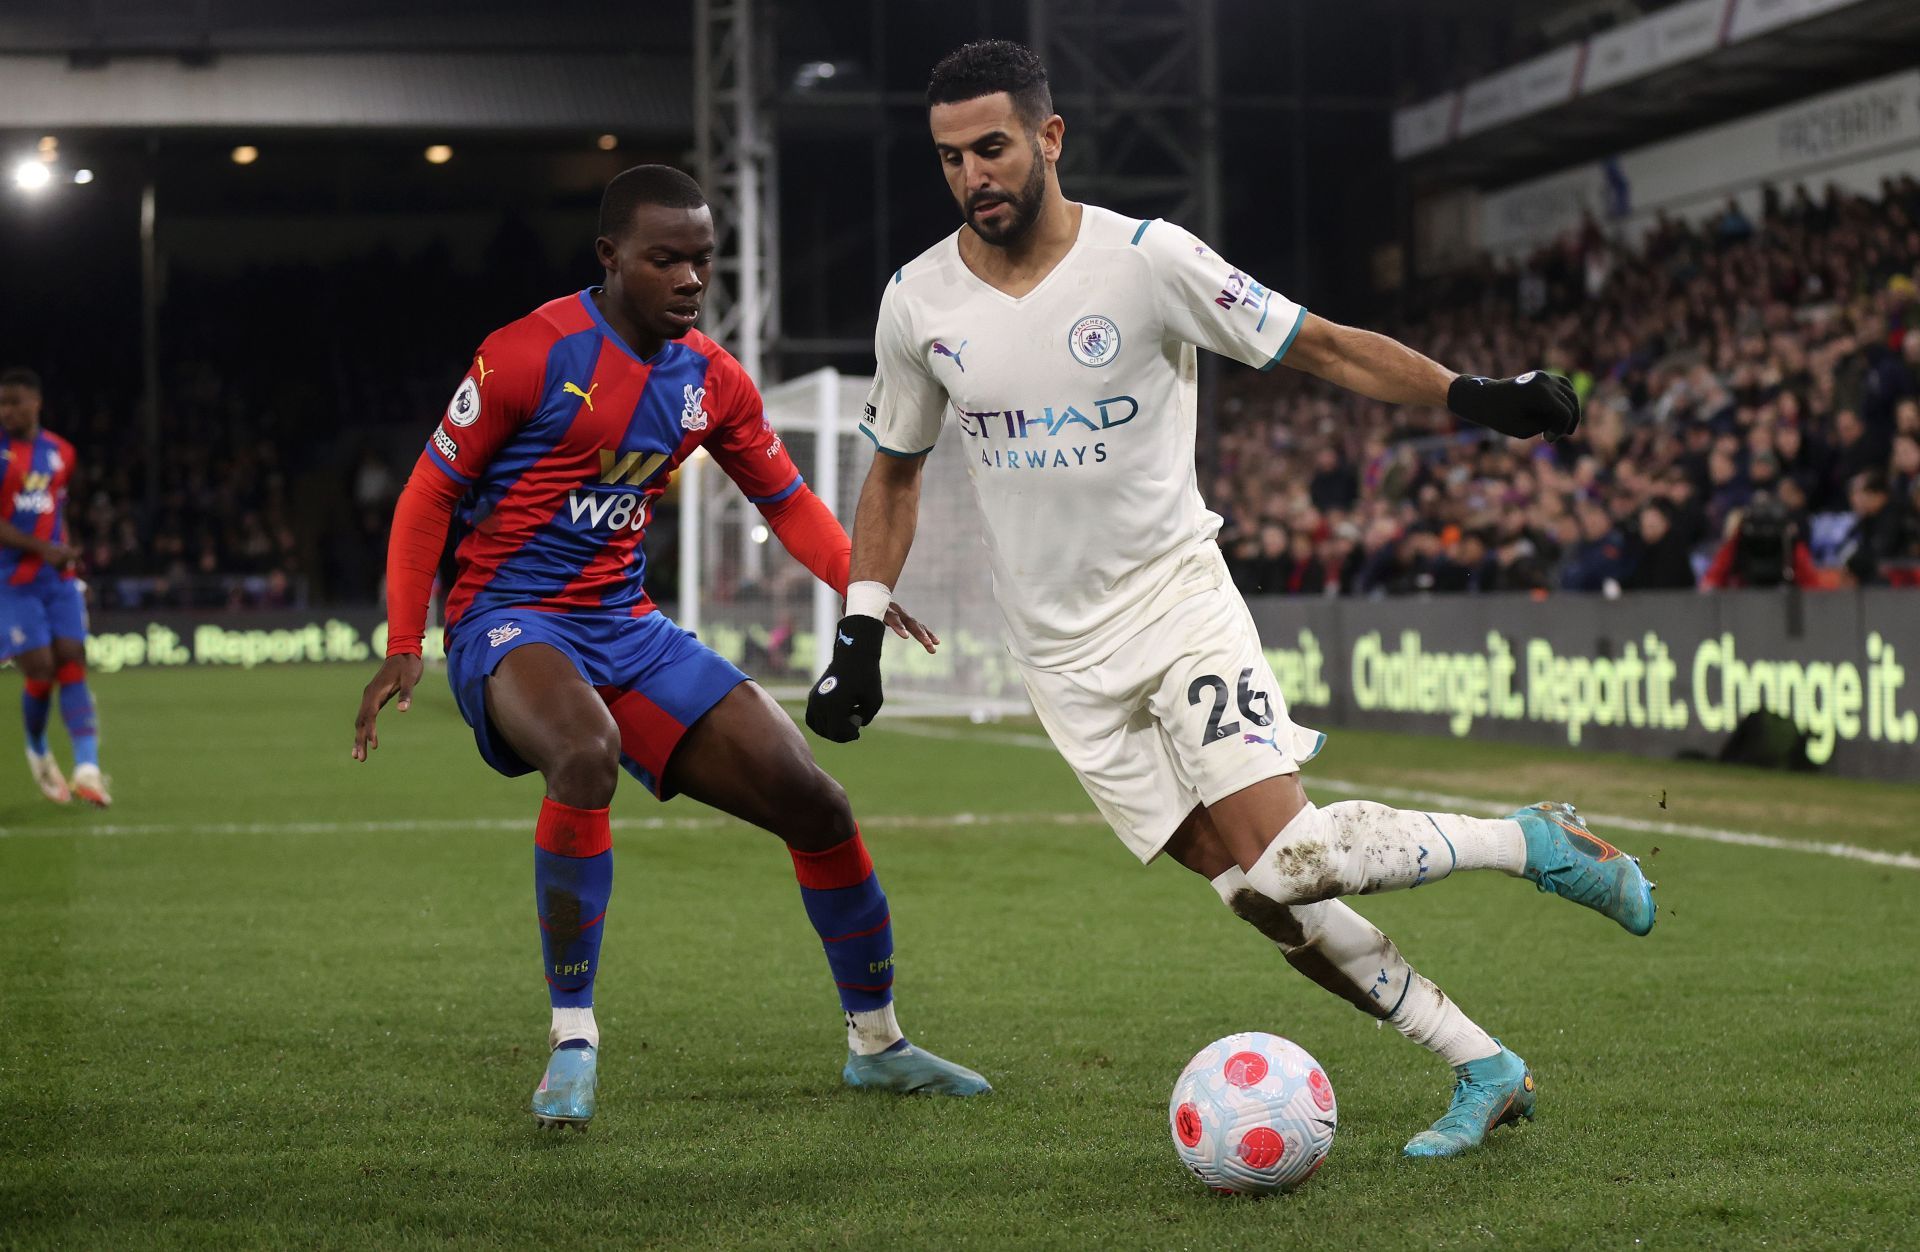 Manchester City were held to a goalless draw by Crystal Palace in the Premier League